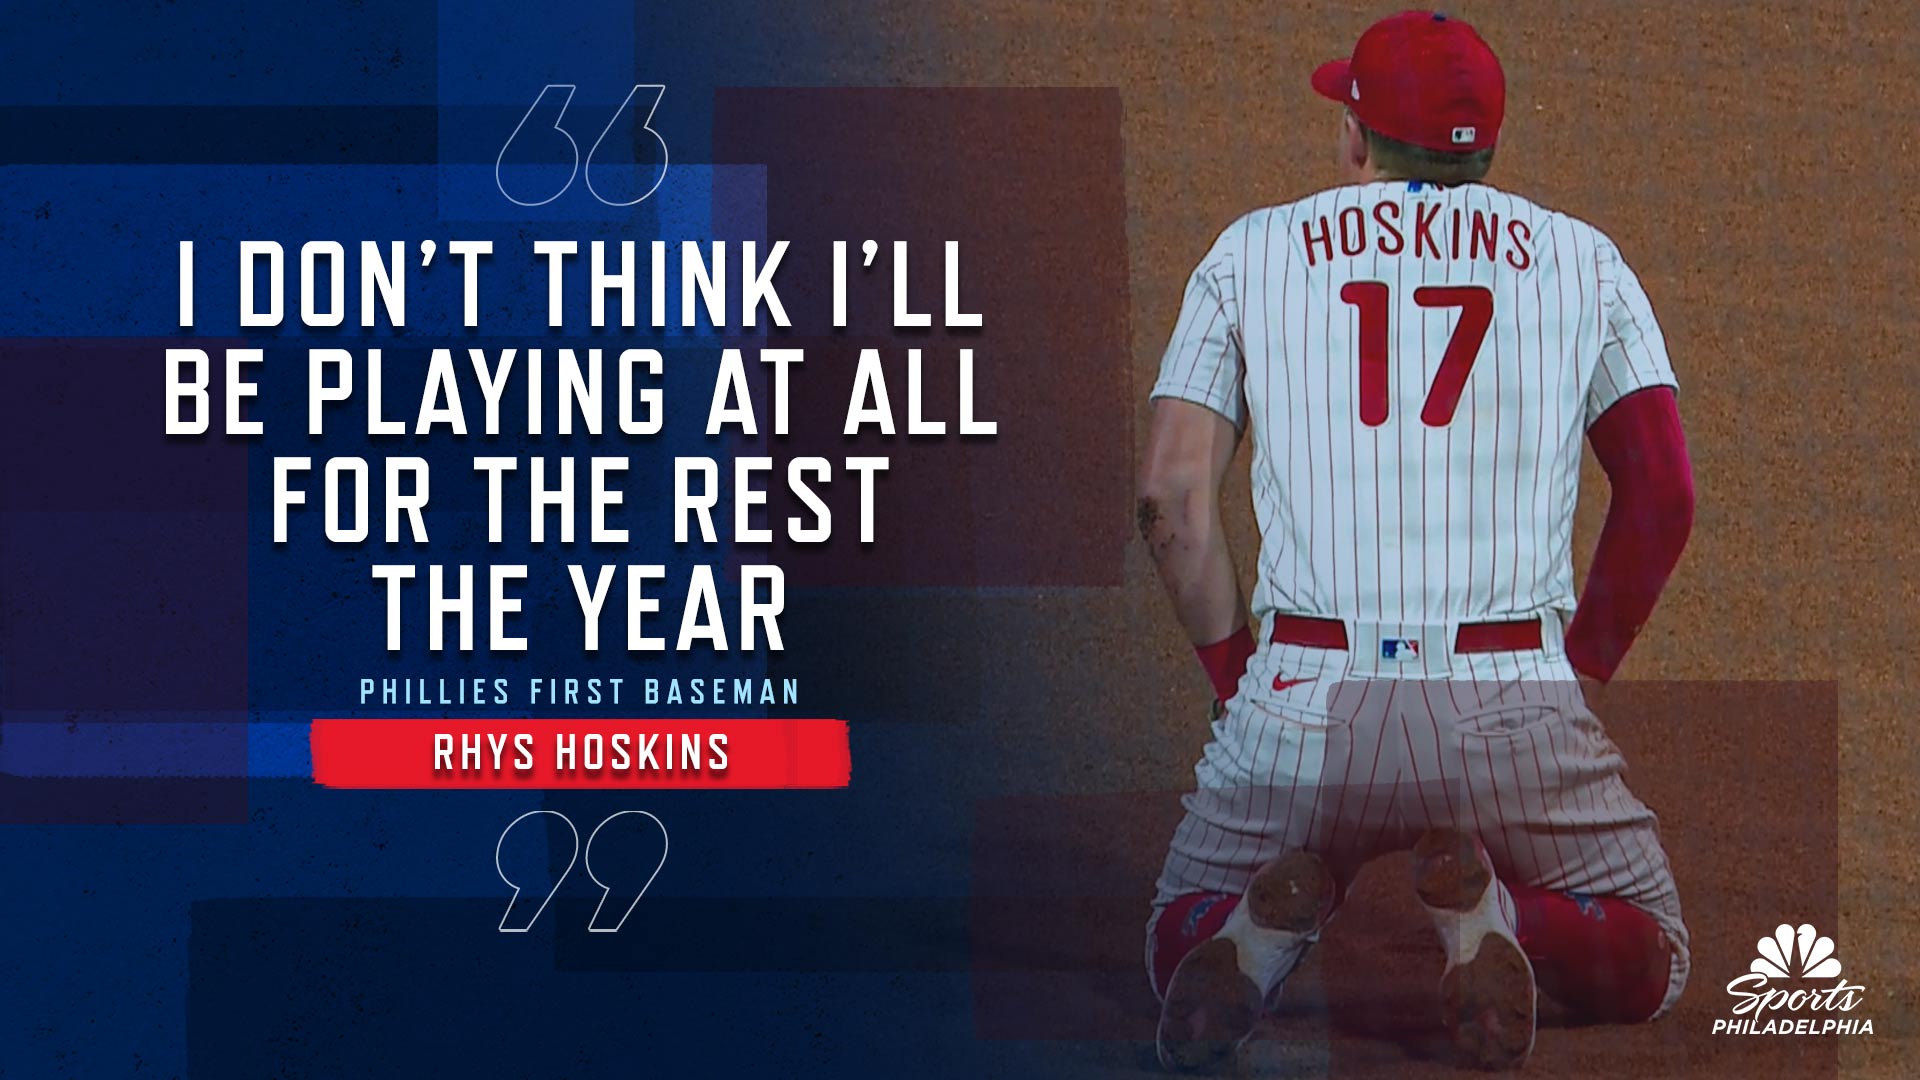 A somber Rhys Hoskins says his 2021 season is over, set to get